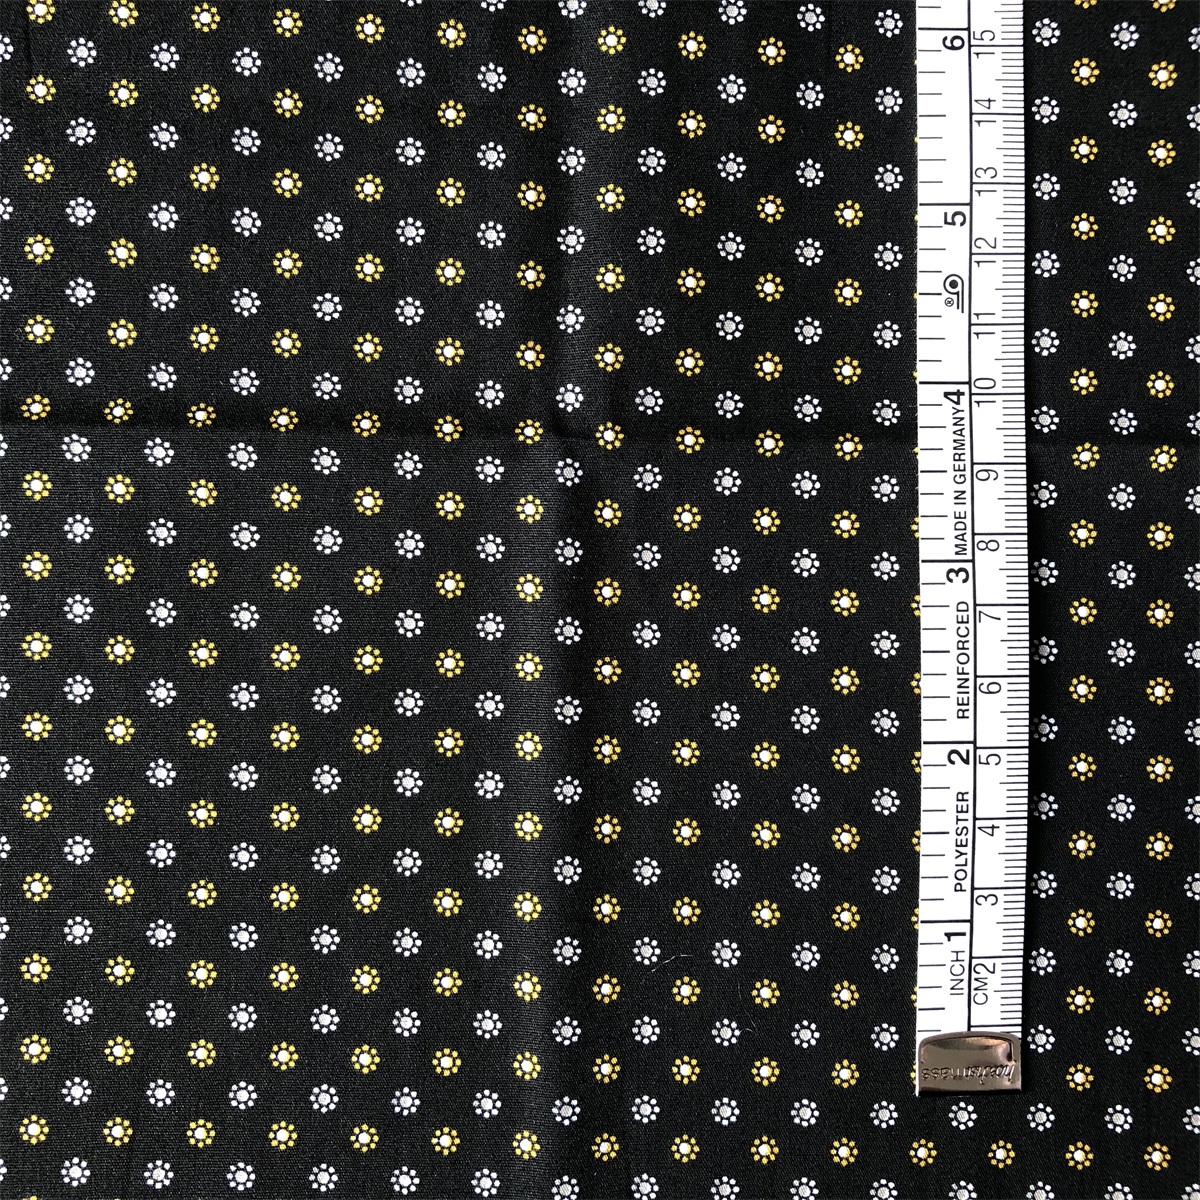 Sun-rising Textile Cotton Printed fabric for men's casual shirts 100% cotton poplin printed shirts woven fabric soft touch